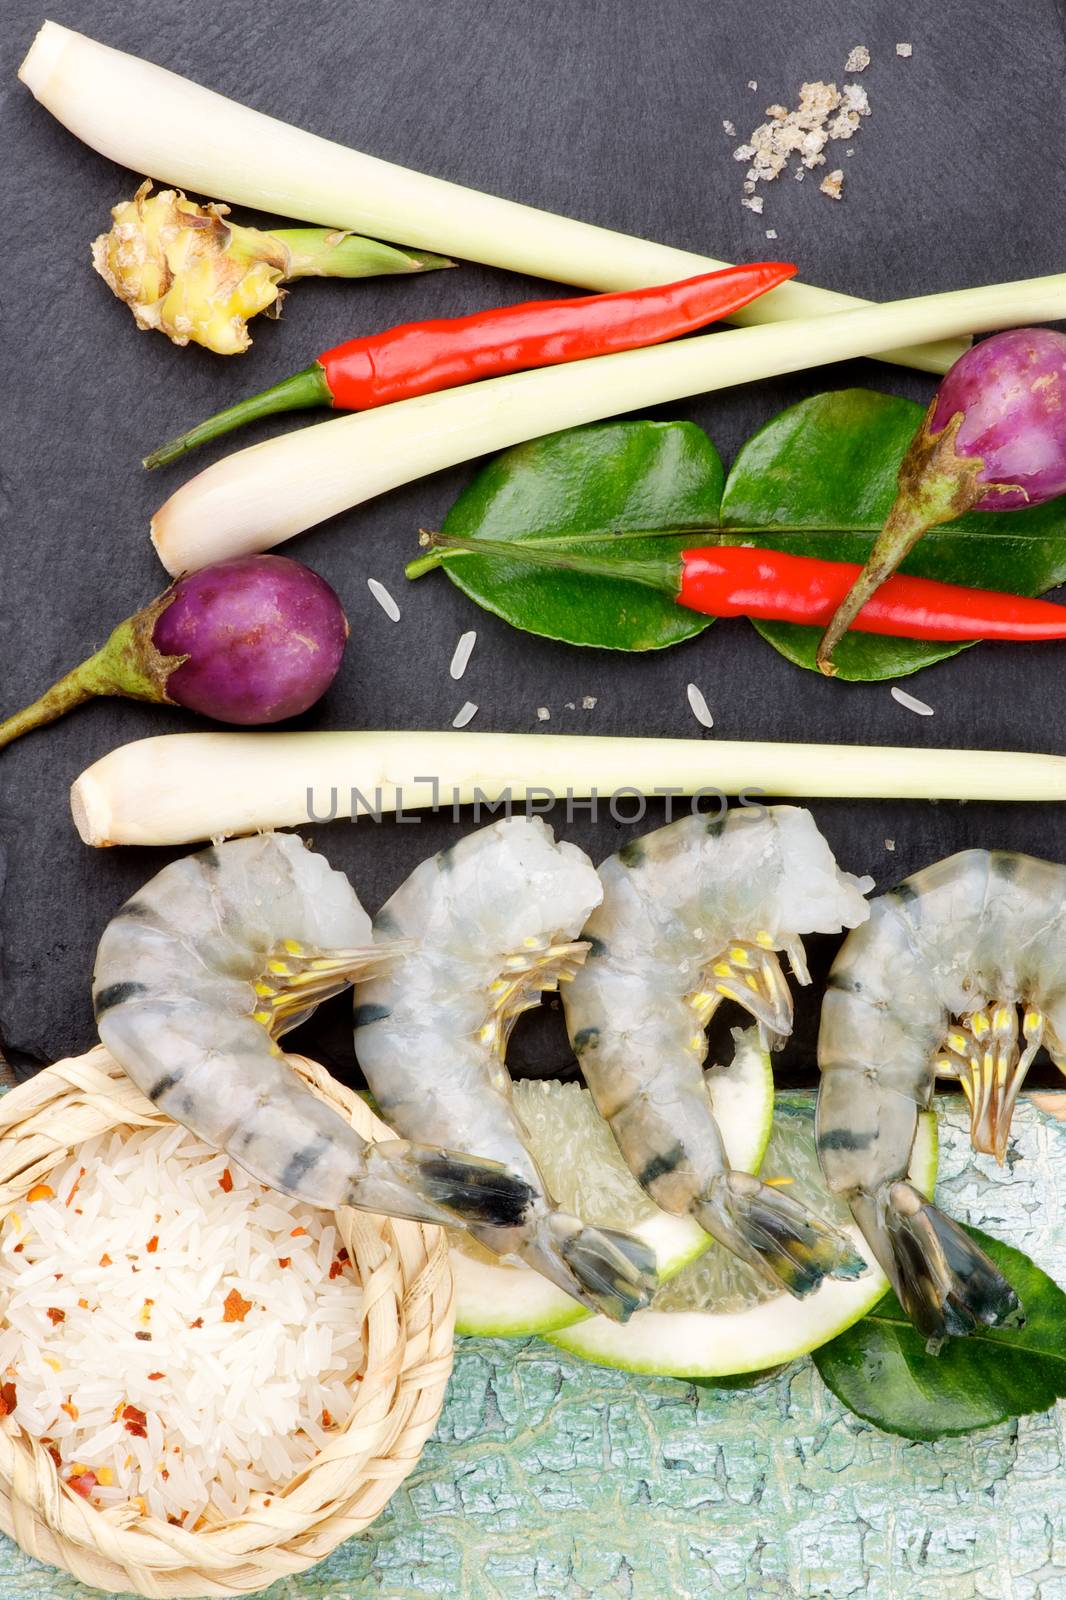 Ingredients of Thai Tom Yam Spicy Soup with Big King Shrimps, Lime, Lemon Grass, Chili Peppers and Spices, Raw Rice and Greens closeup on Slate and Wooden background. Top View